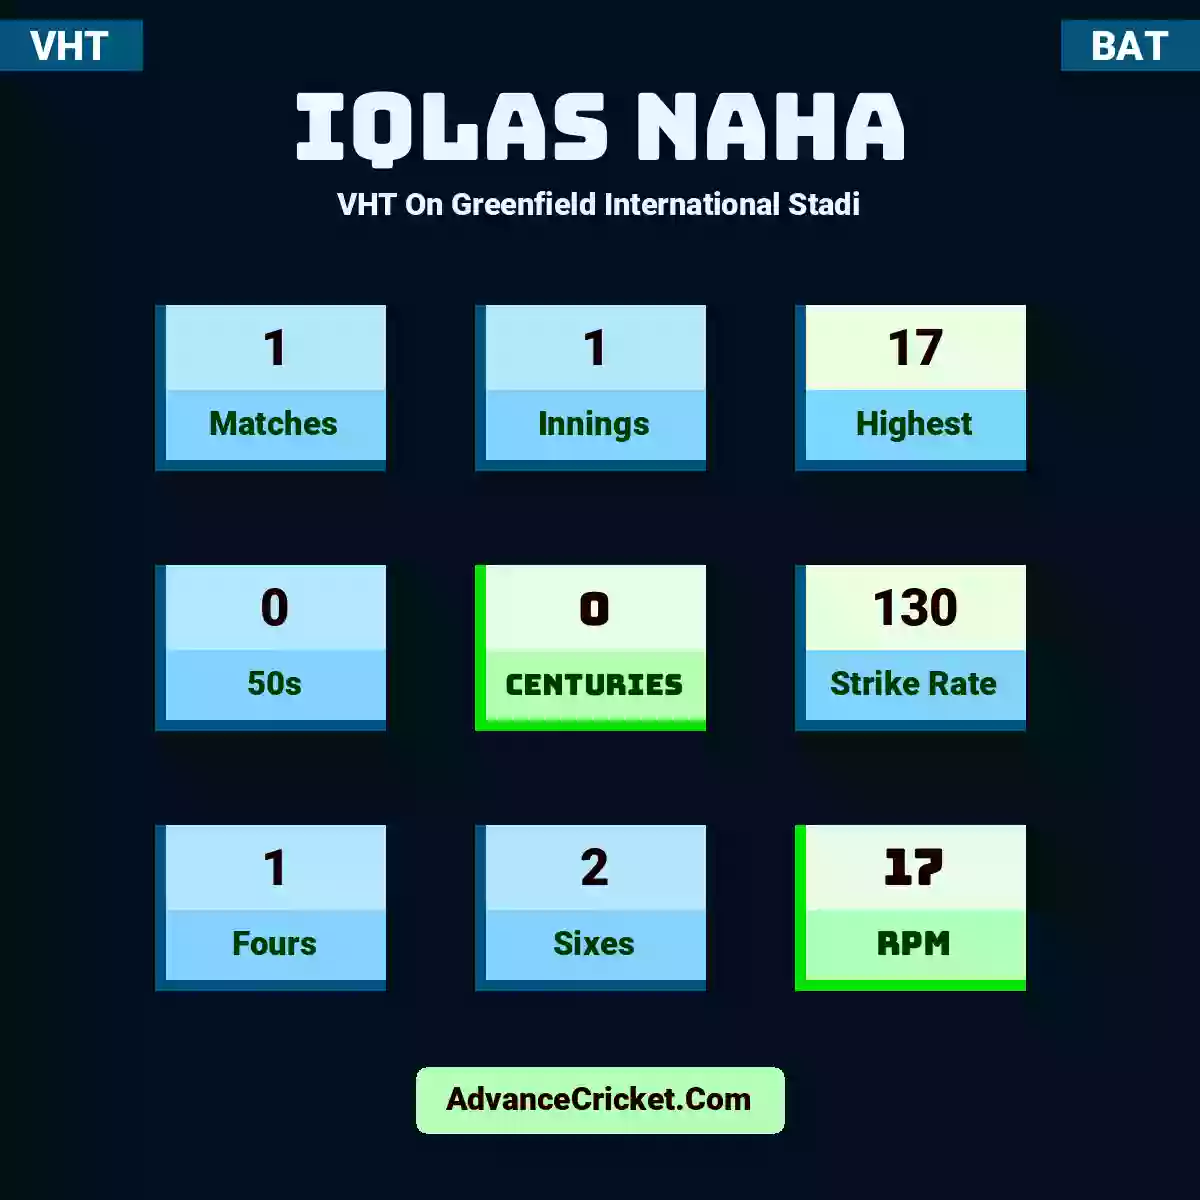 Iqlas Naha VHT  On Greenfield International Stadi, Iqlas Naha played 1 matches, scored 17 runs as highest, 0 half-centuries, and 0 centuries, with a strike rate of 130. I.Naha hit 1 fours and 2 sixes, with an RPM of 17.